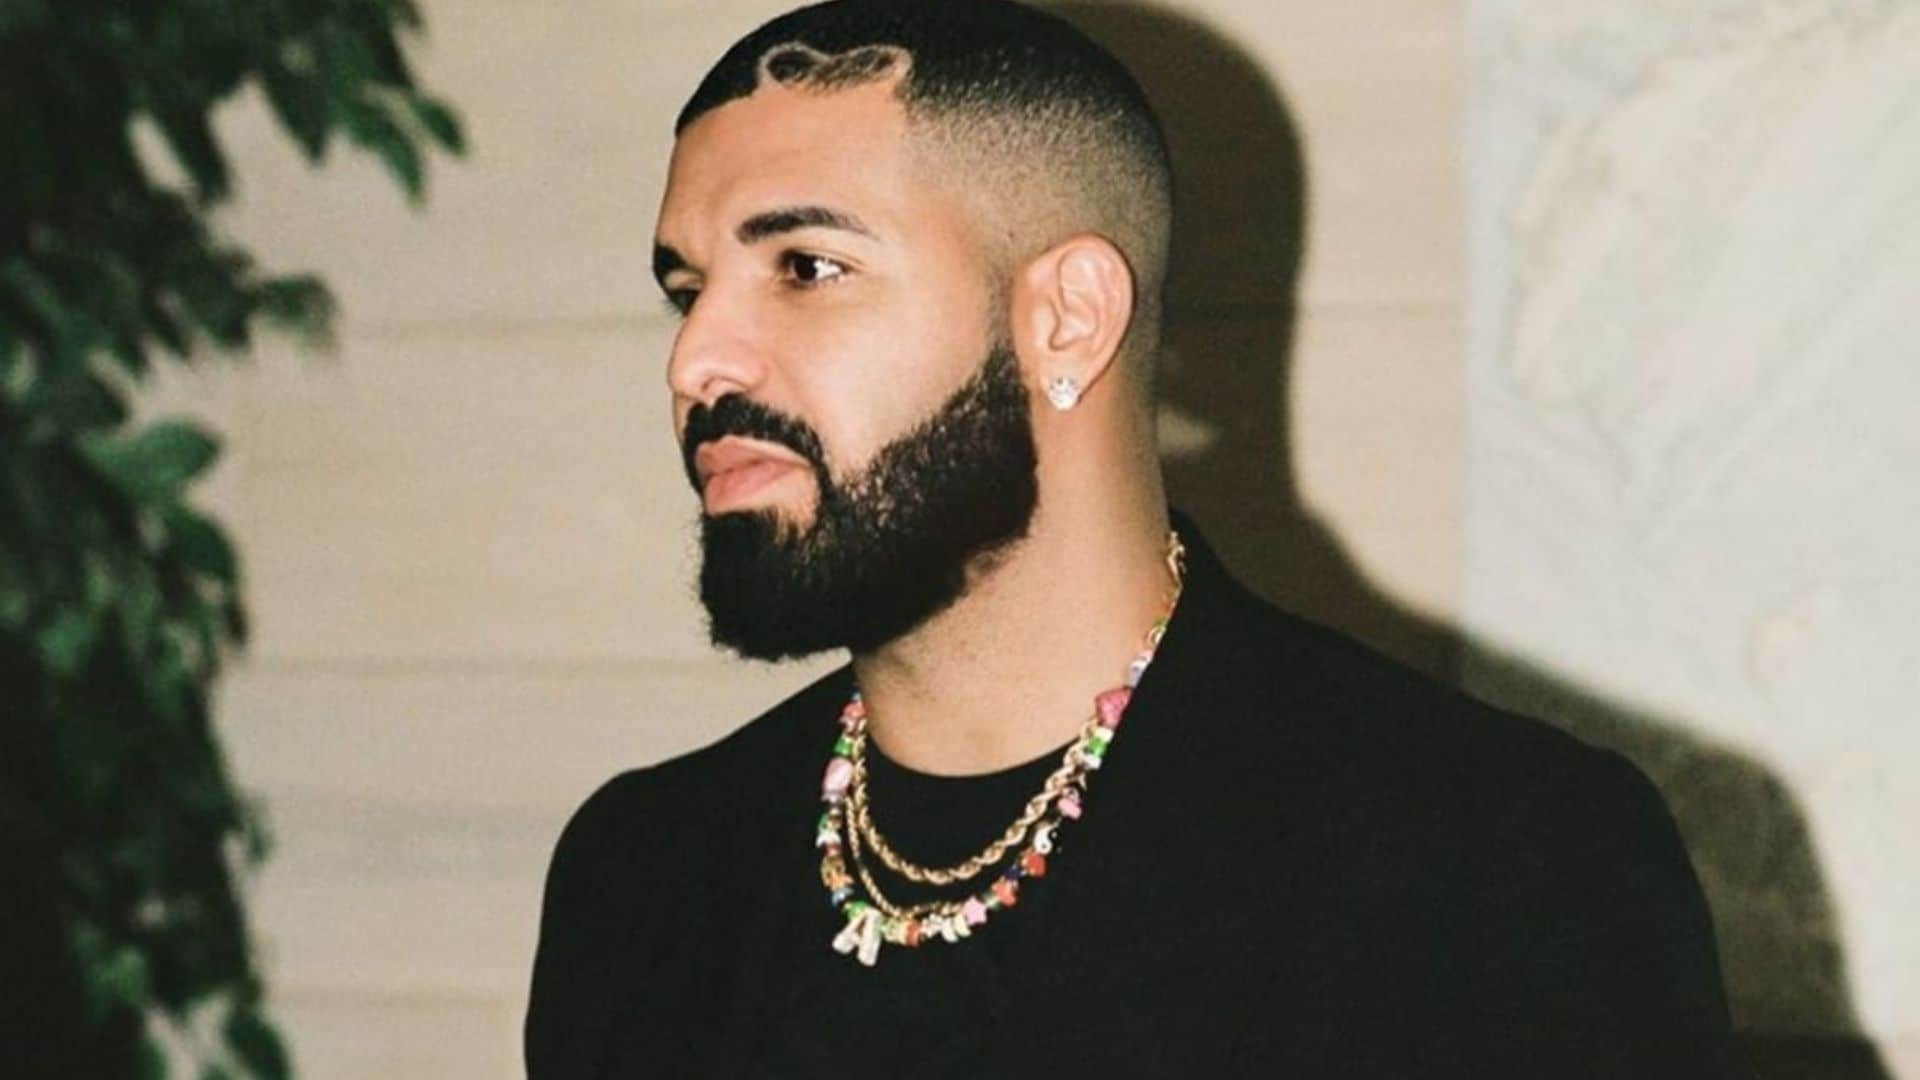 Drake reveals he suffered hair loss after battling COVID-19